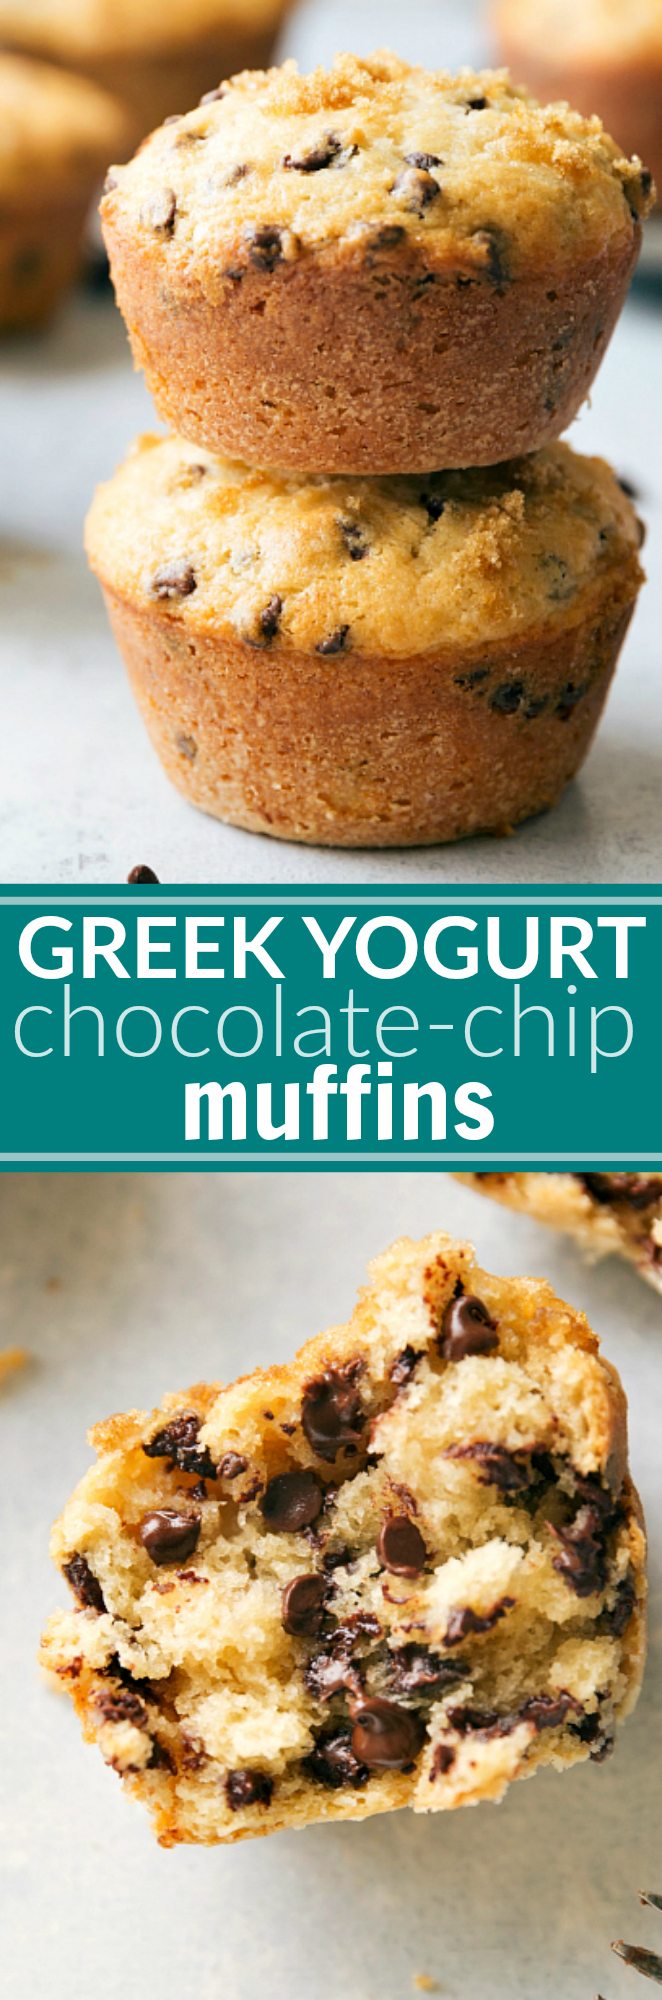 Greek yogurt chocolate-chip muffins made with better-for-you ingredients and no sacrifice of flavor! These muffins are soft, tender, moist, and delicious! via chelseasmessyapron.com